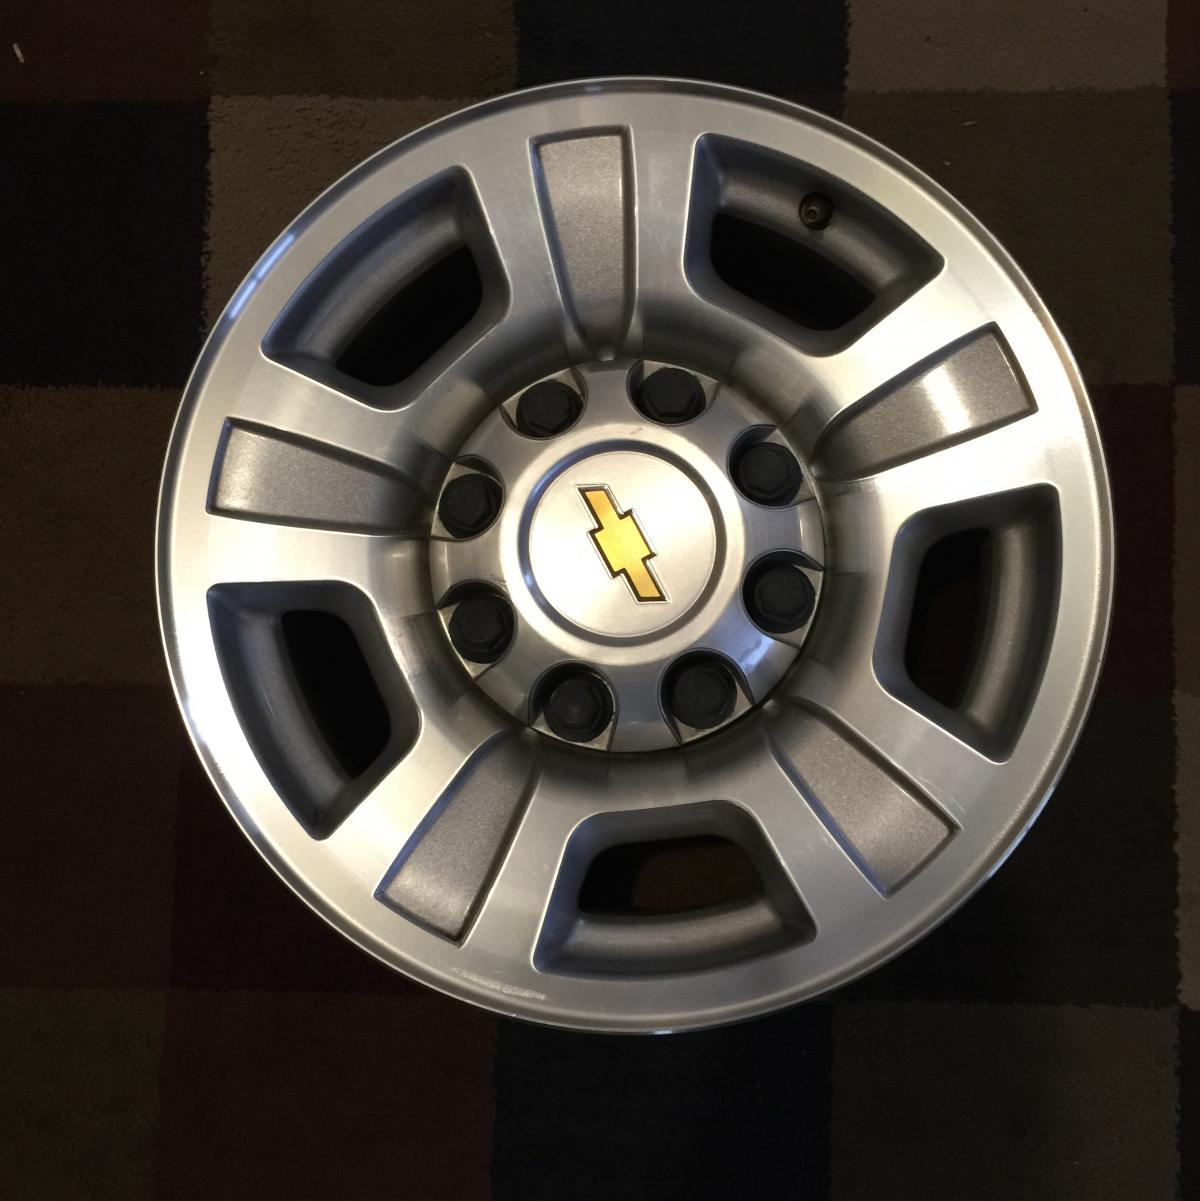 Chevy 8 Lug Factory rims - Classified Ads - CouesWhitetail.com ...